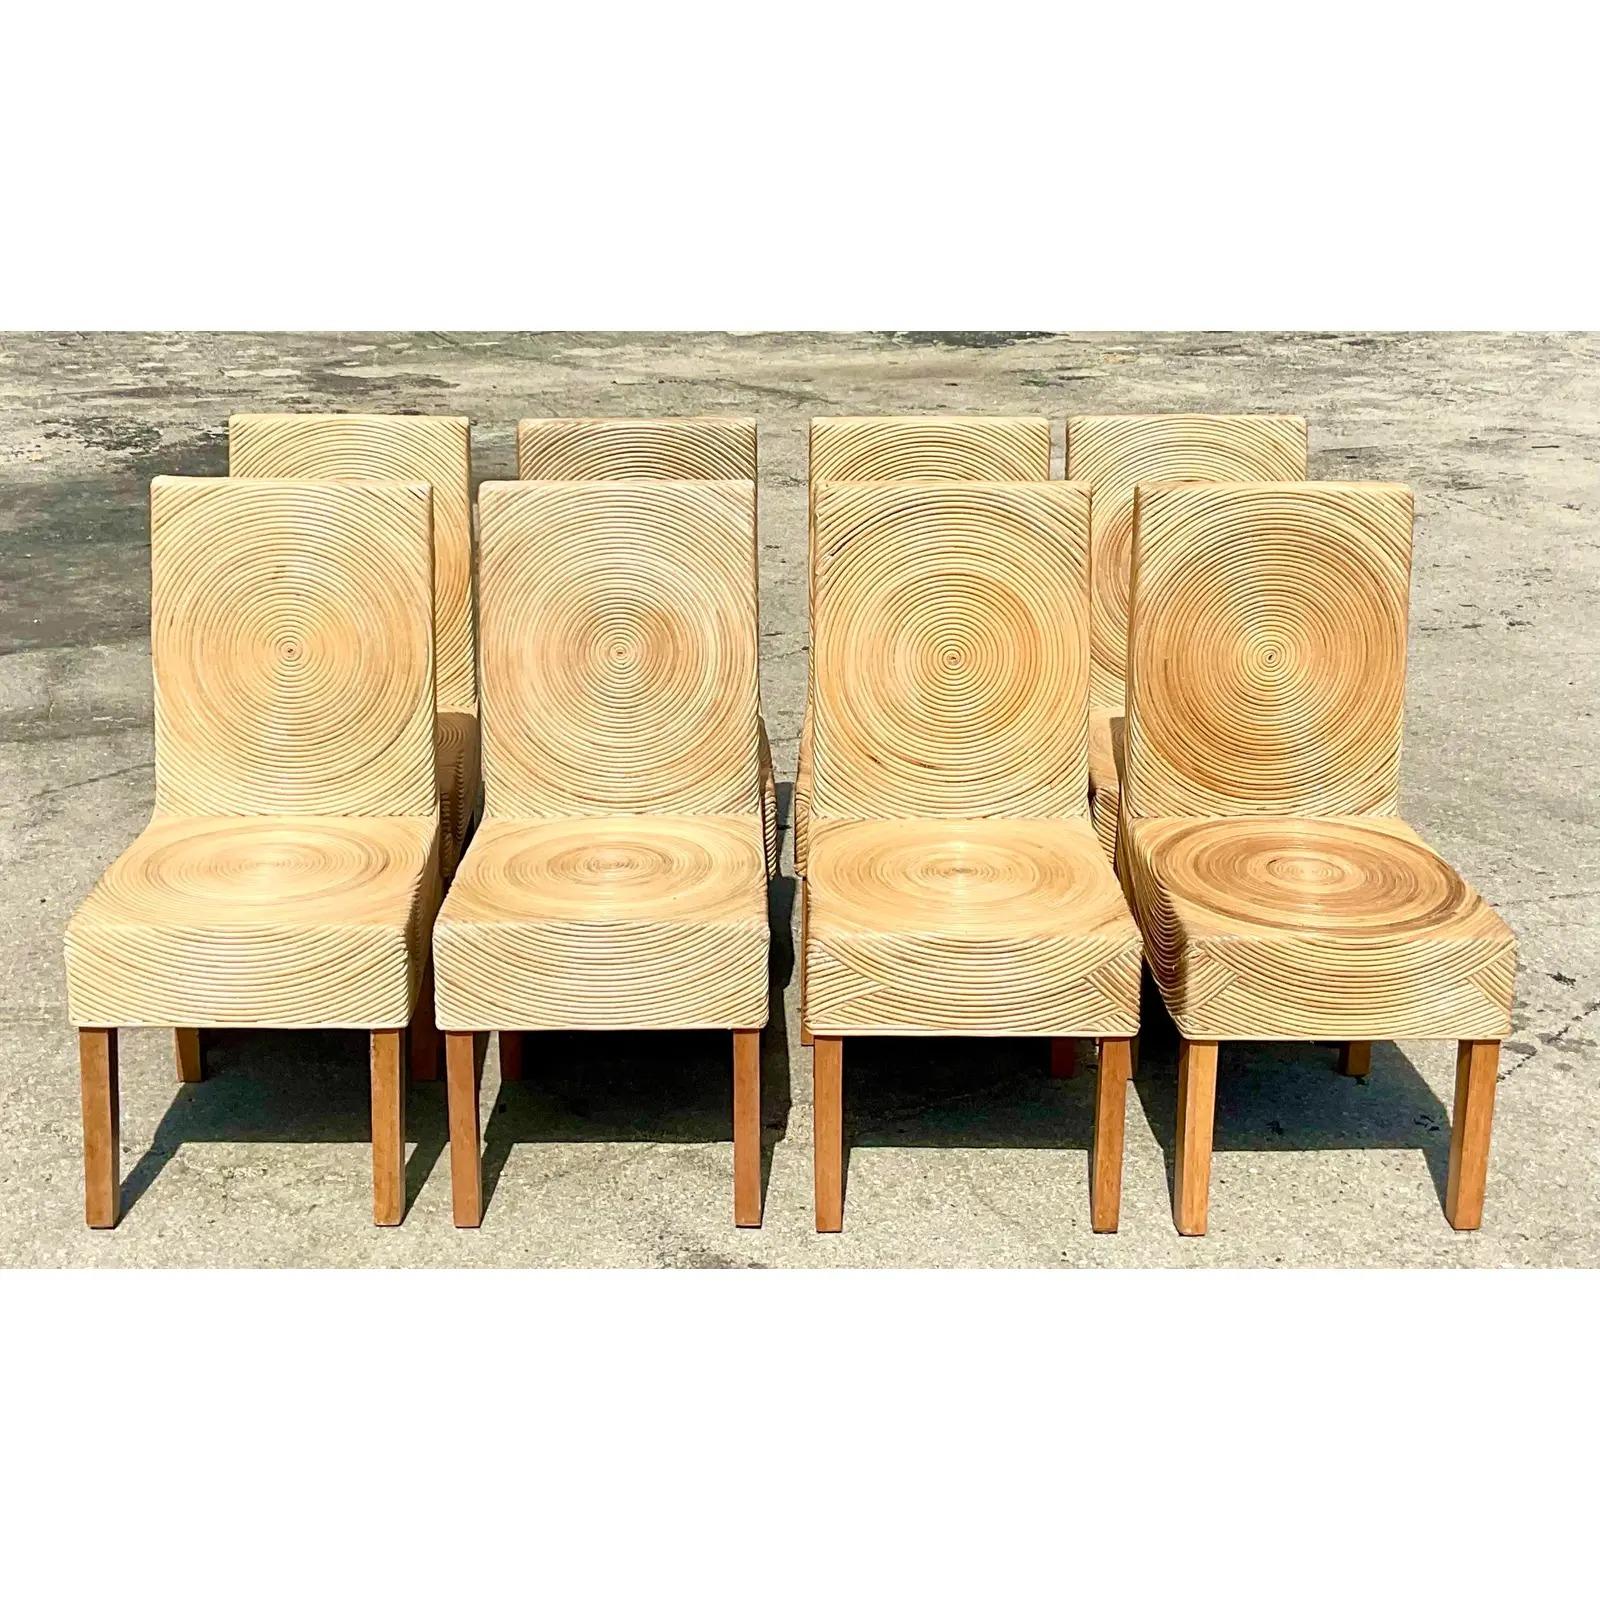 Philippine Coastal Vintage Pencil Reed Circle Dining Chairs, Set of 8